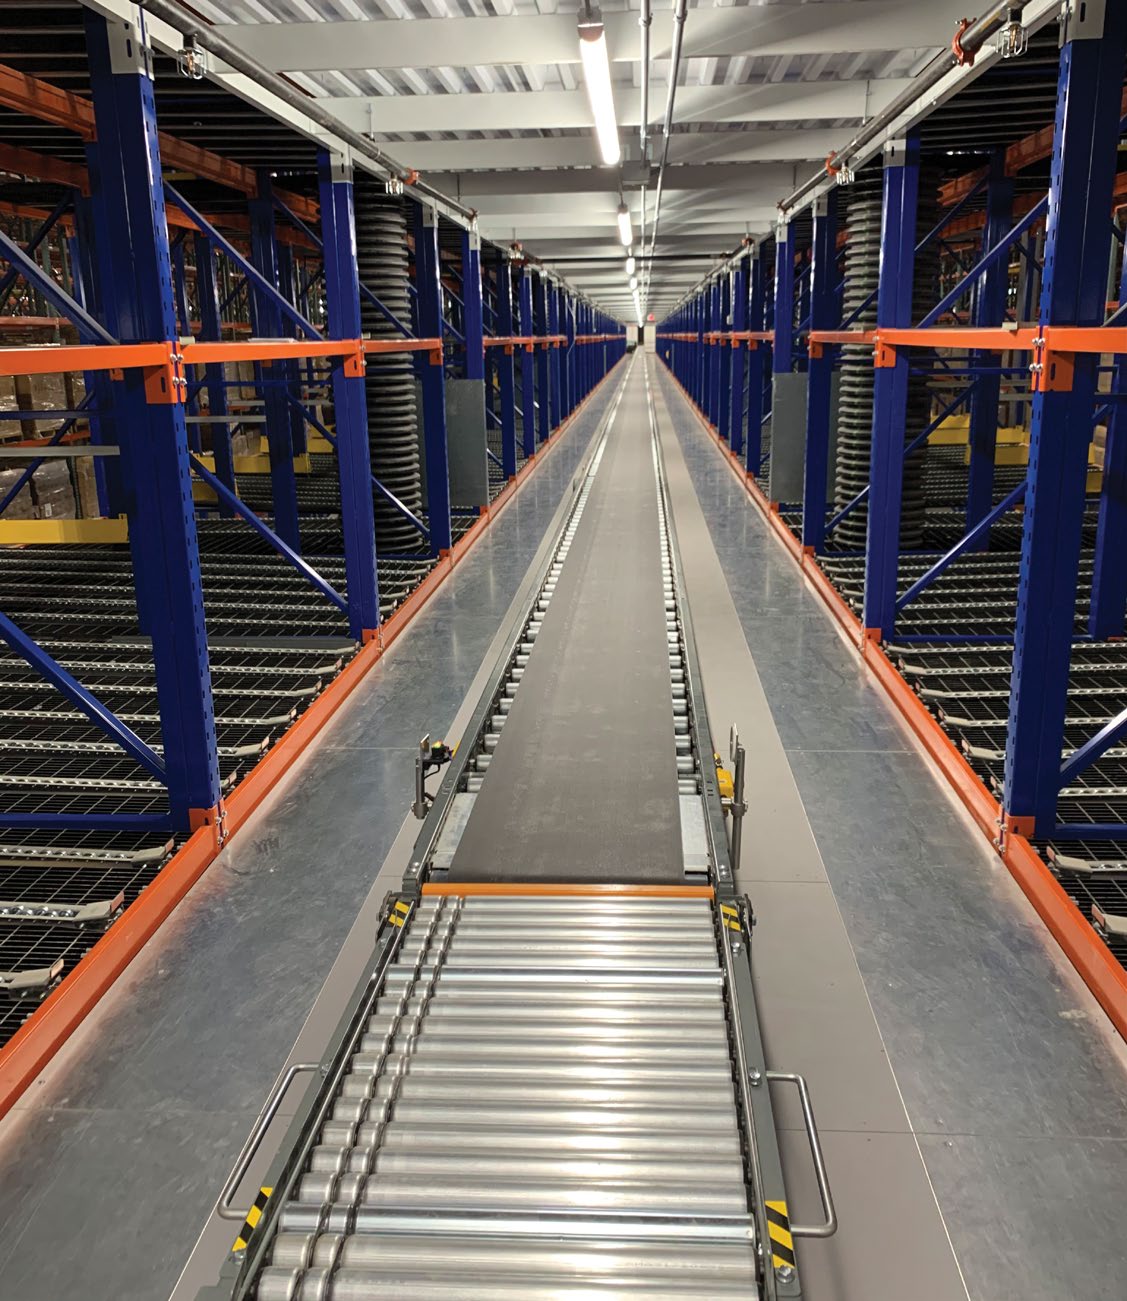 Systems Integrator Saved Time and Money Using ResinDek® with MetaGard® Steel Flooring Panels for Full Case Pick Modules